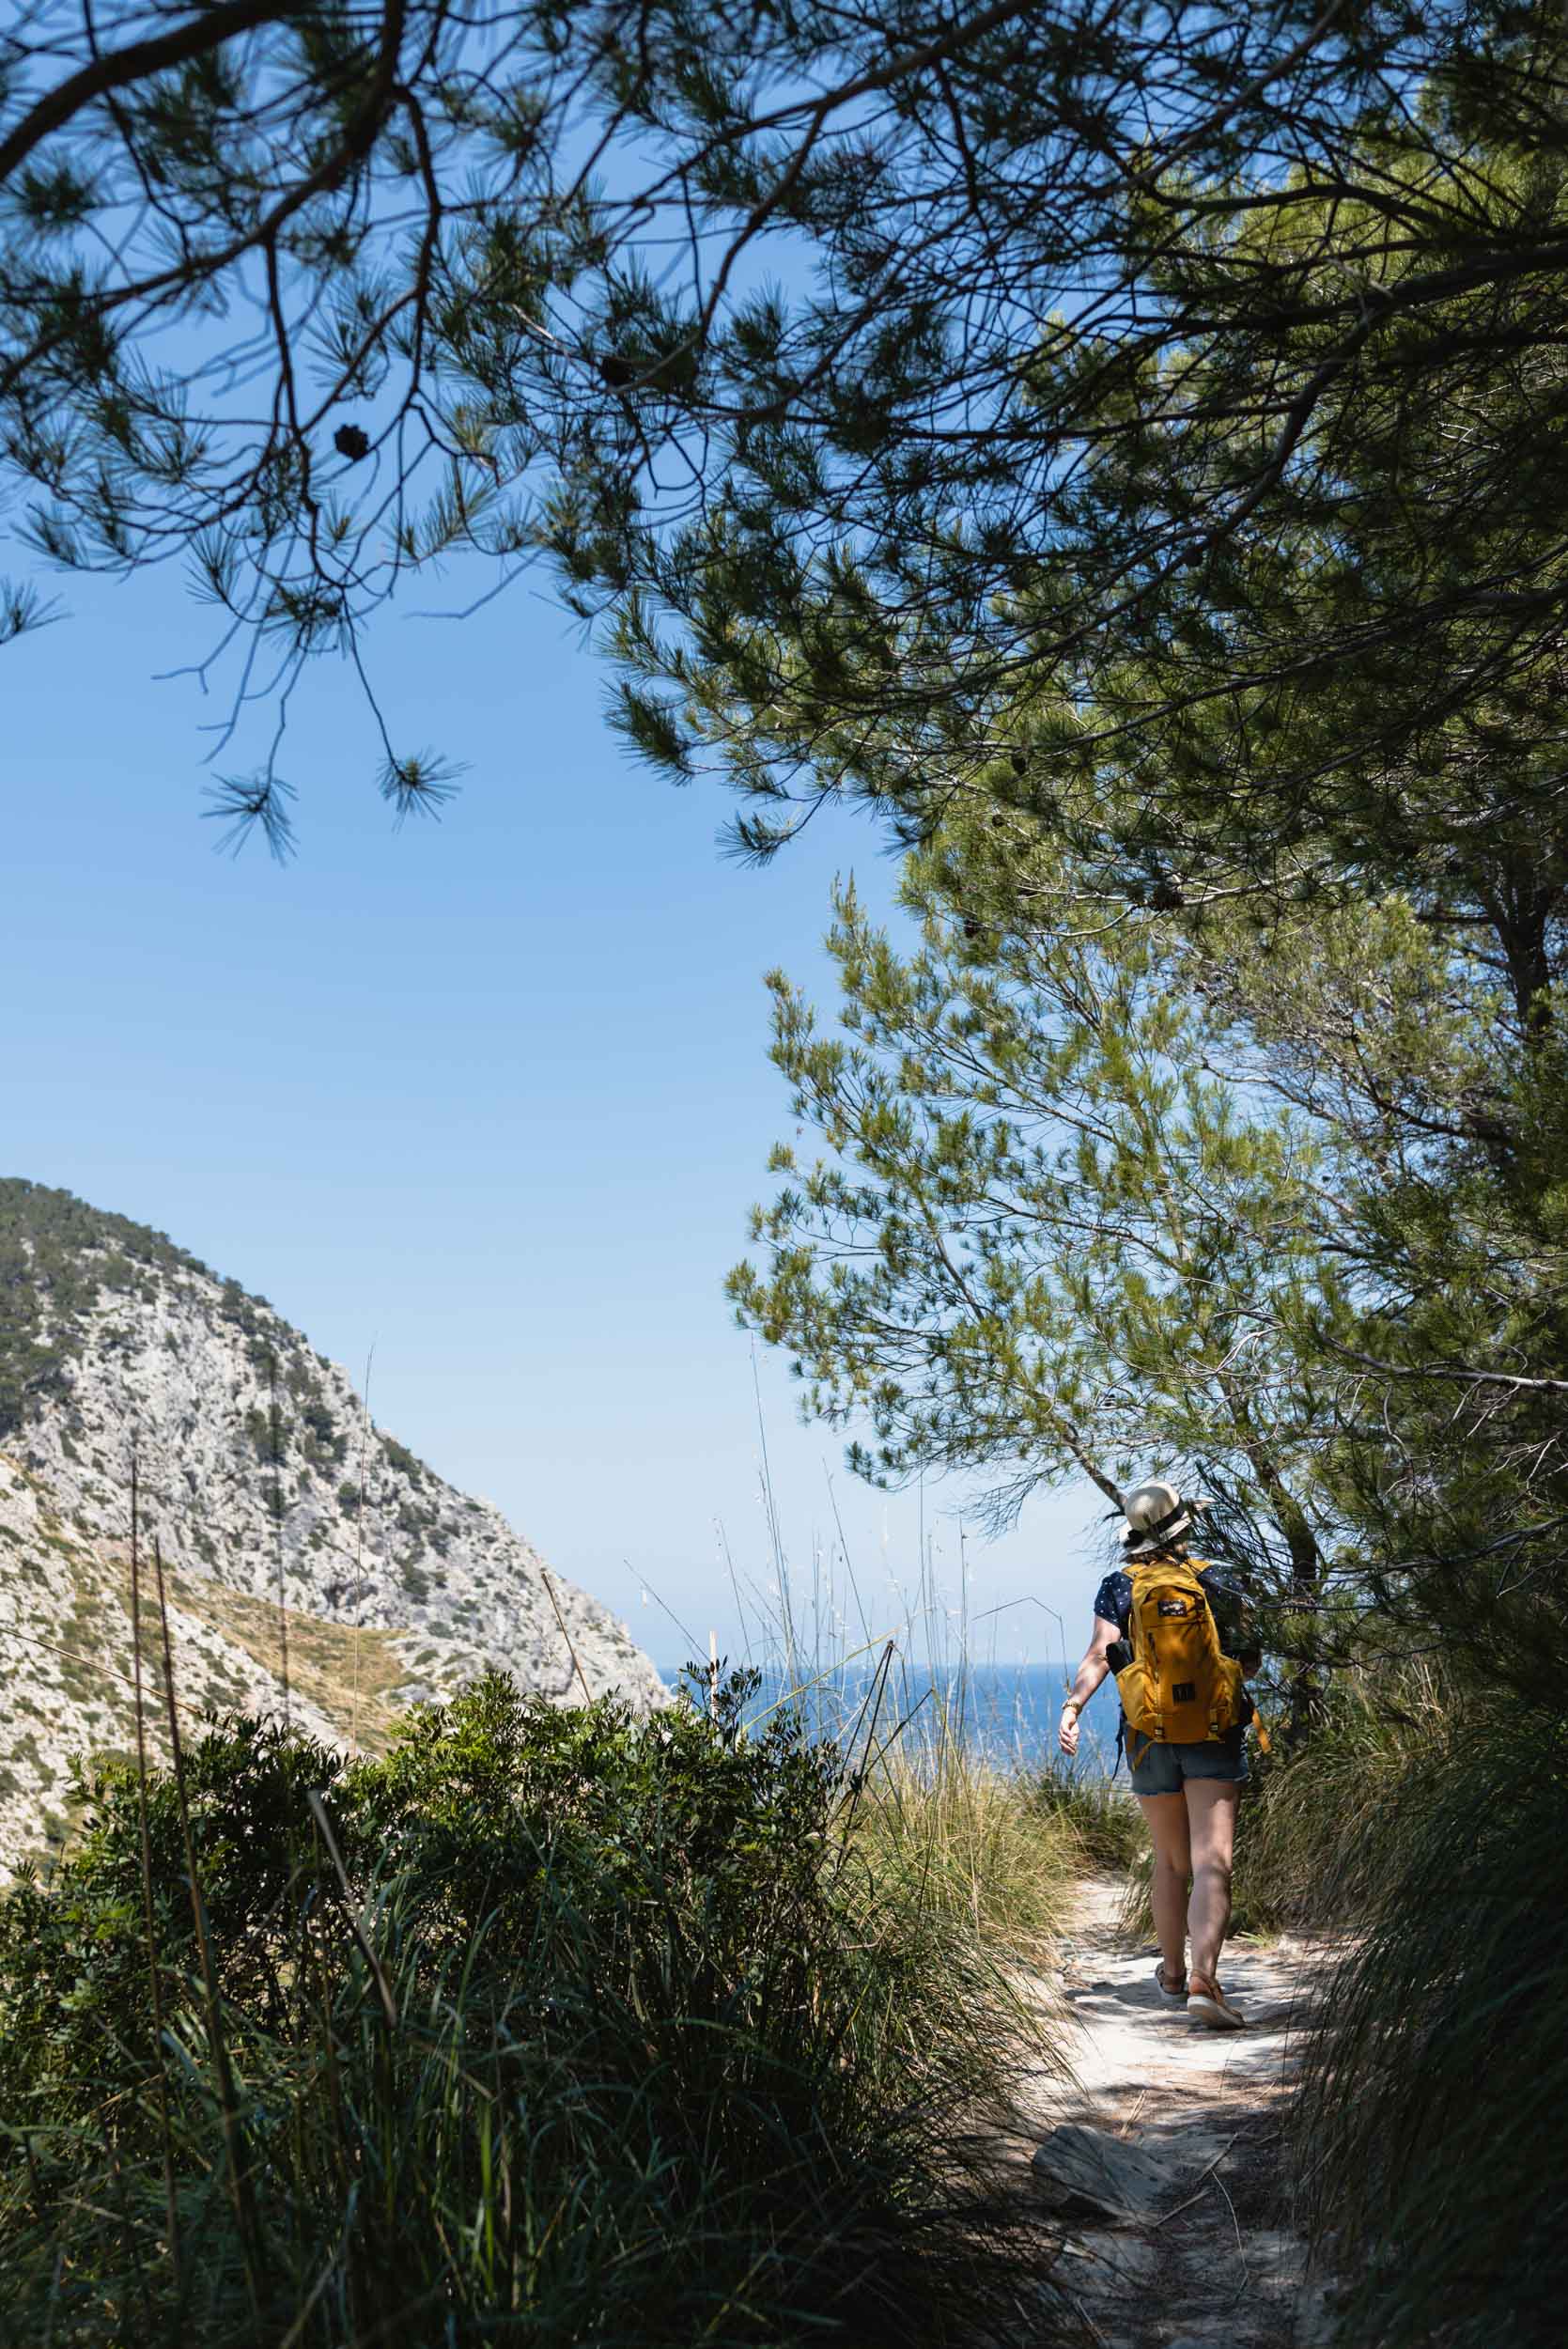 Walking down trail to Cala Figuera